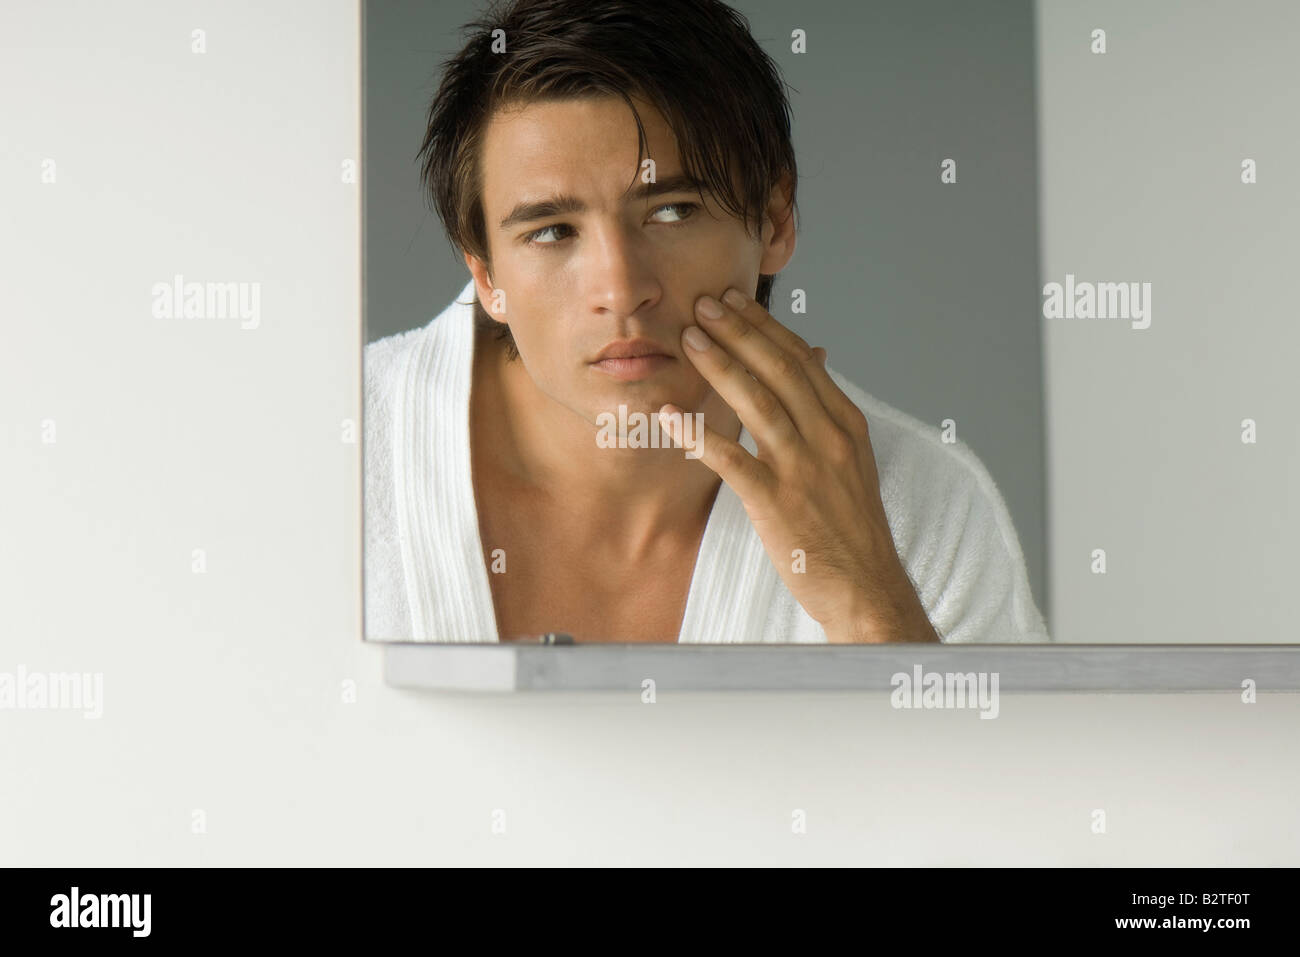 Man looking at self in mirror, touching cheek, cropped view of mirror Stock Photo